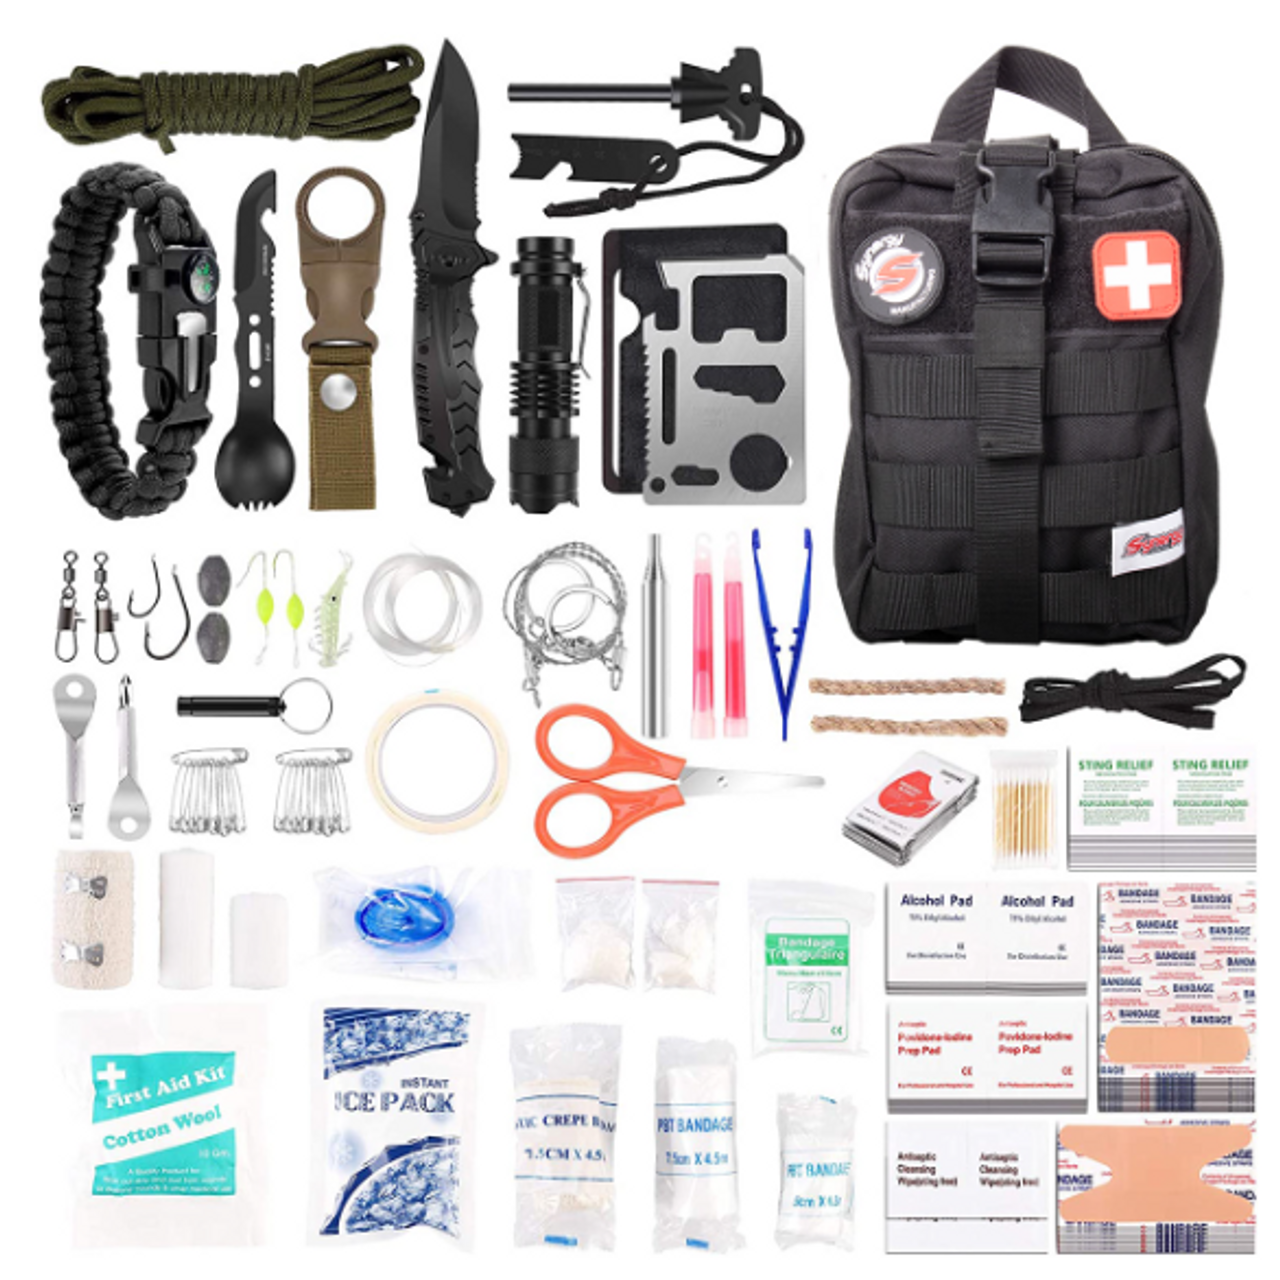 Synergy APL-2017 Survival and First Aid Kit